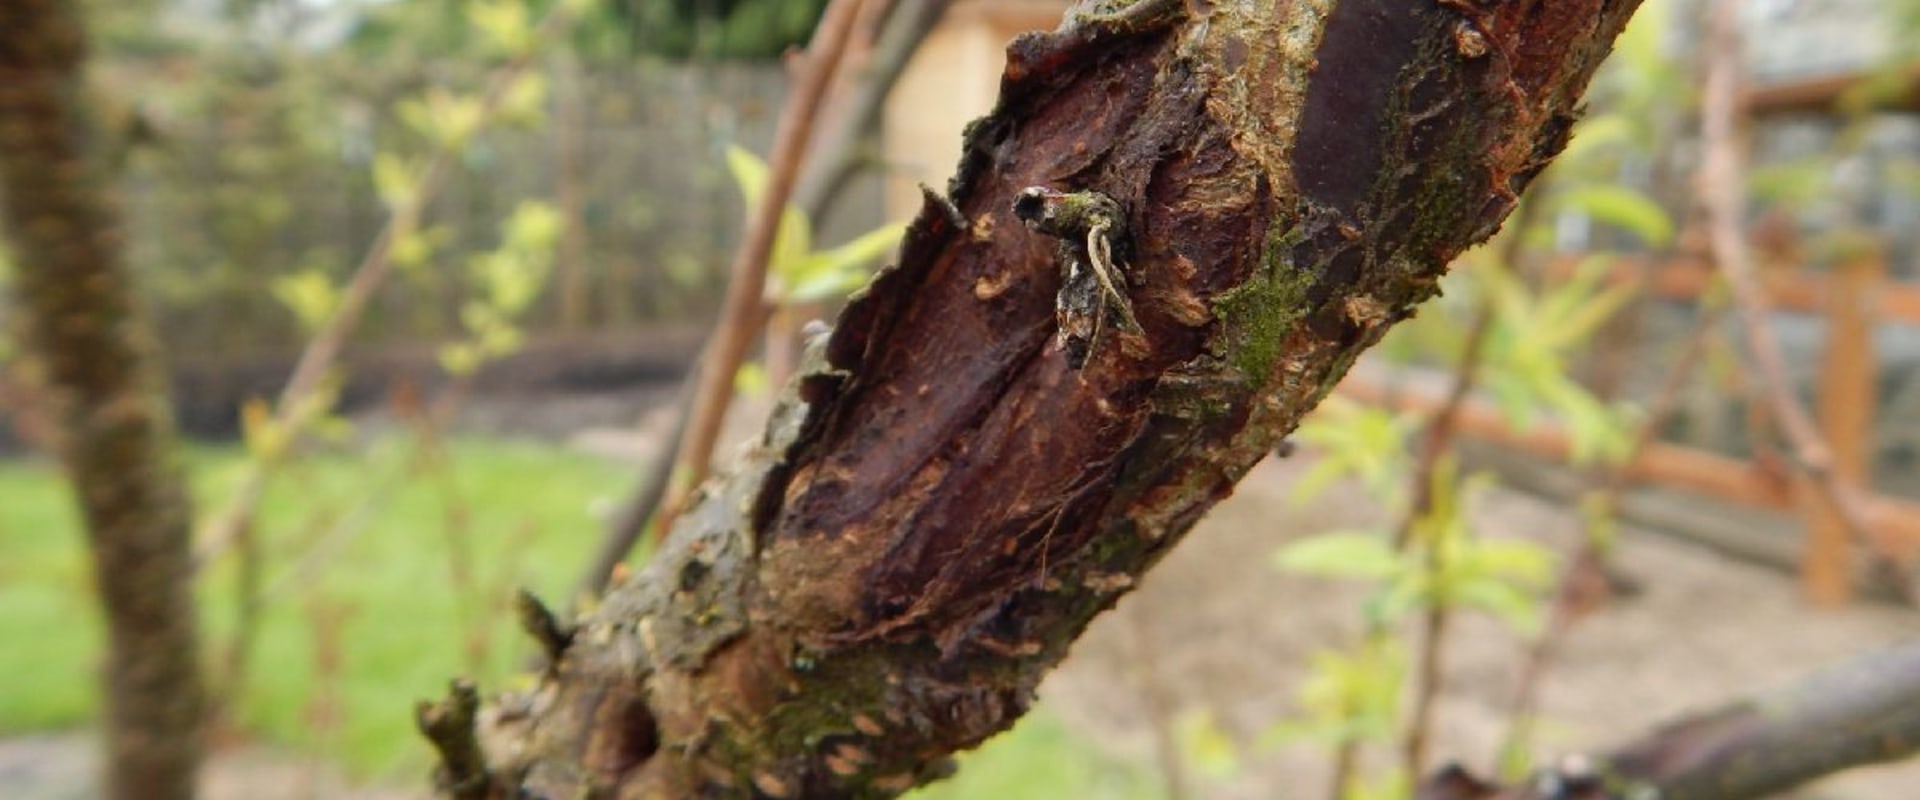 Preventative Measures for Pests and Diseases on Trees